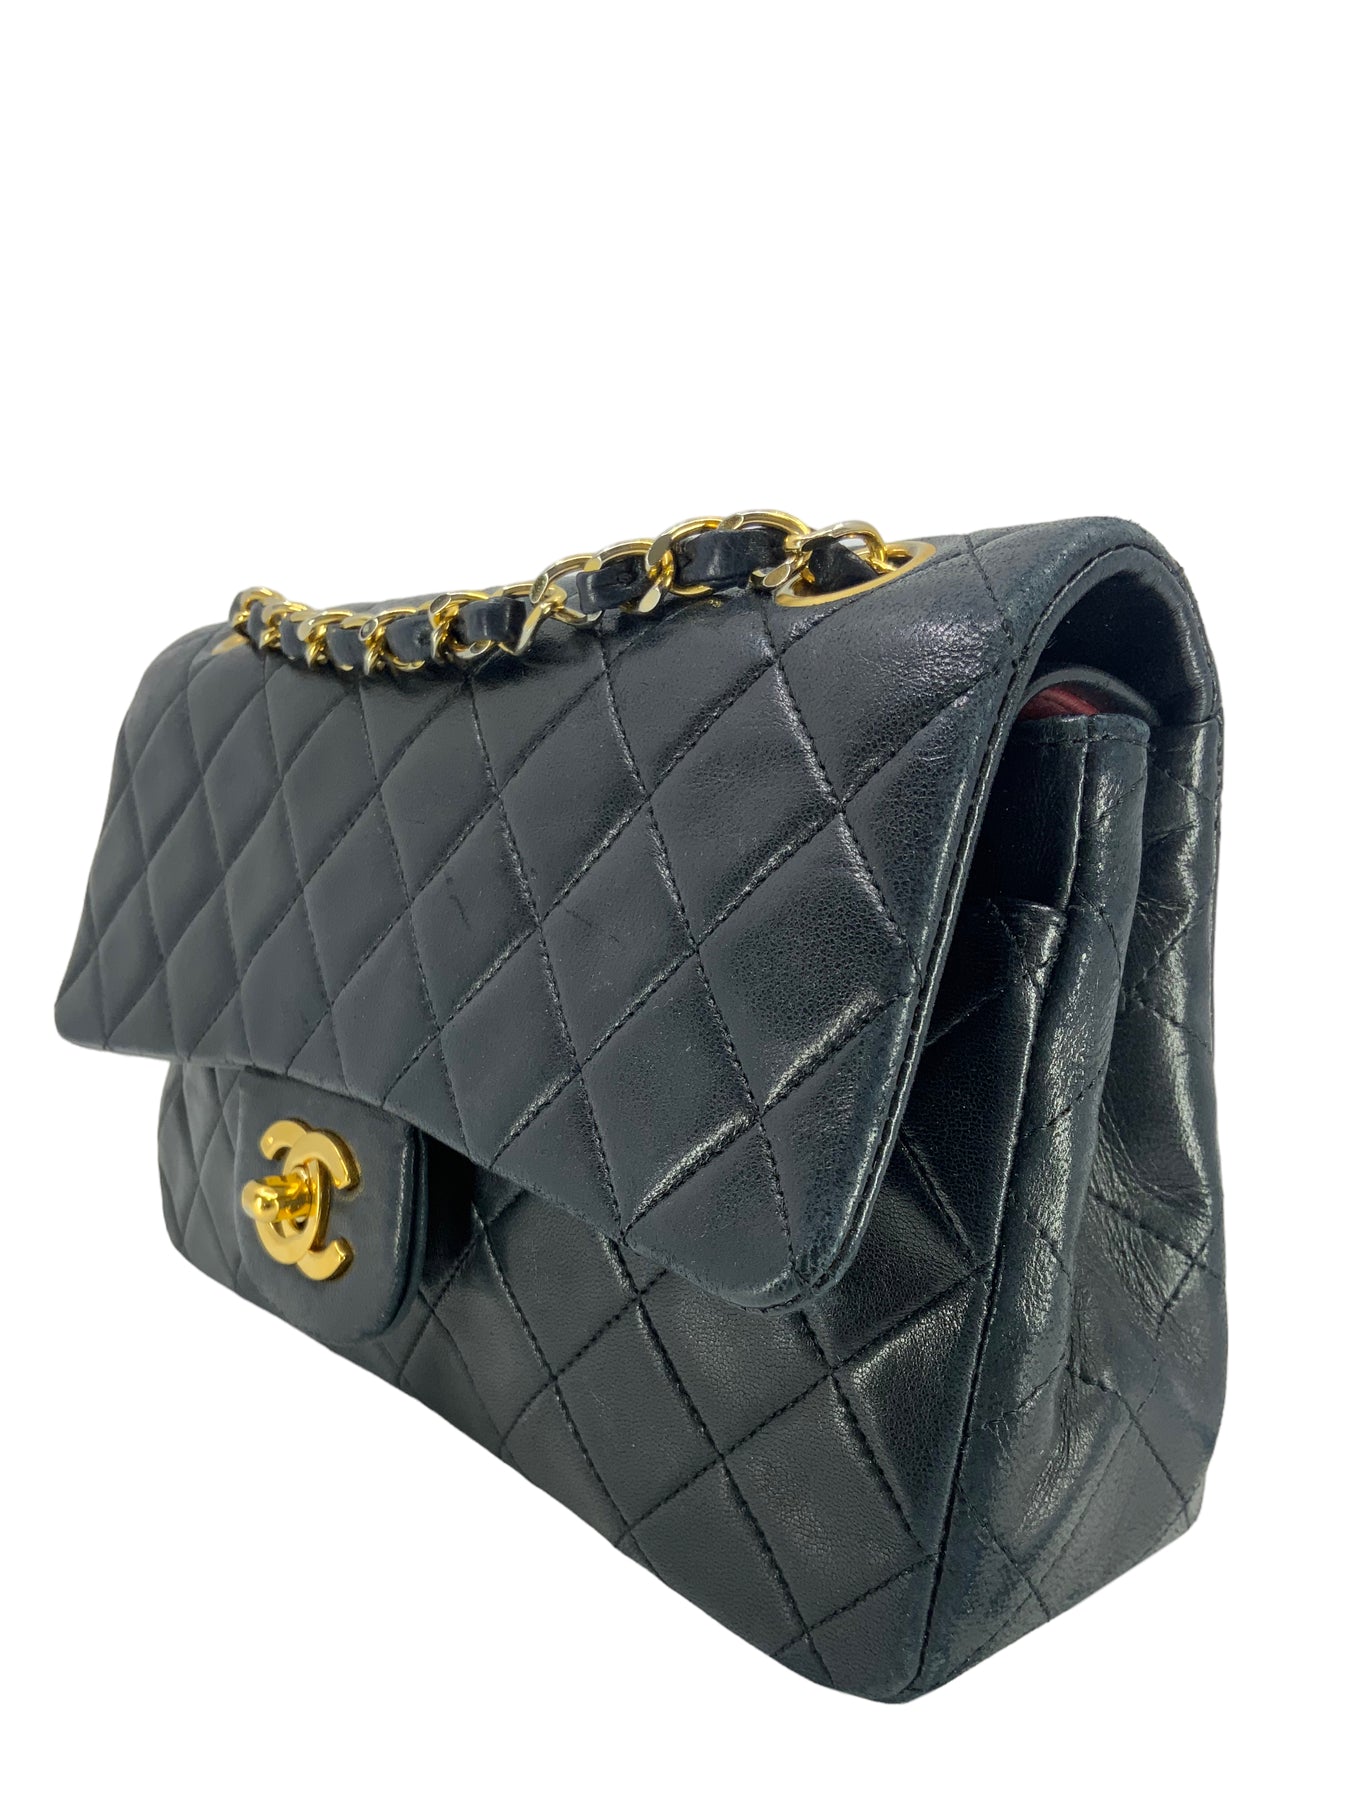 Chanel Quilted Lambskin Small Classic Double Flap Bag - Consigned Designs